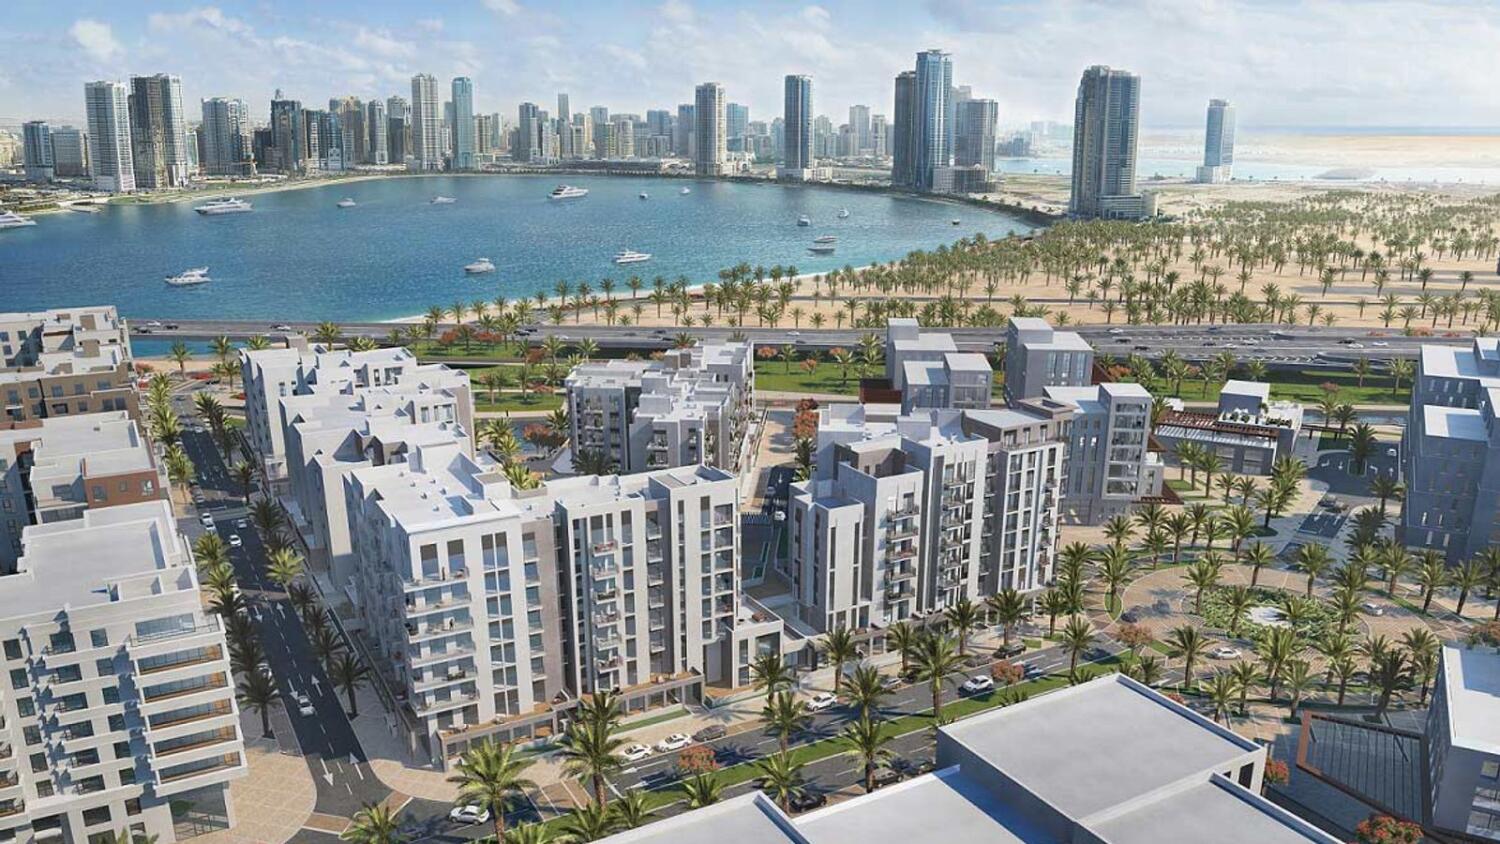 The Maryam Gate Residences project is launched in Maryam Island, Sharjah